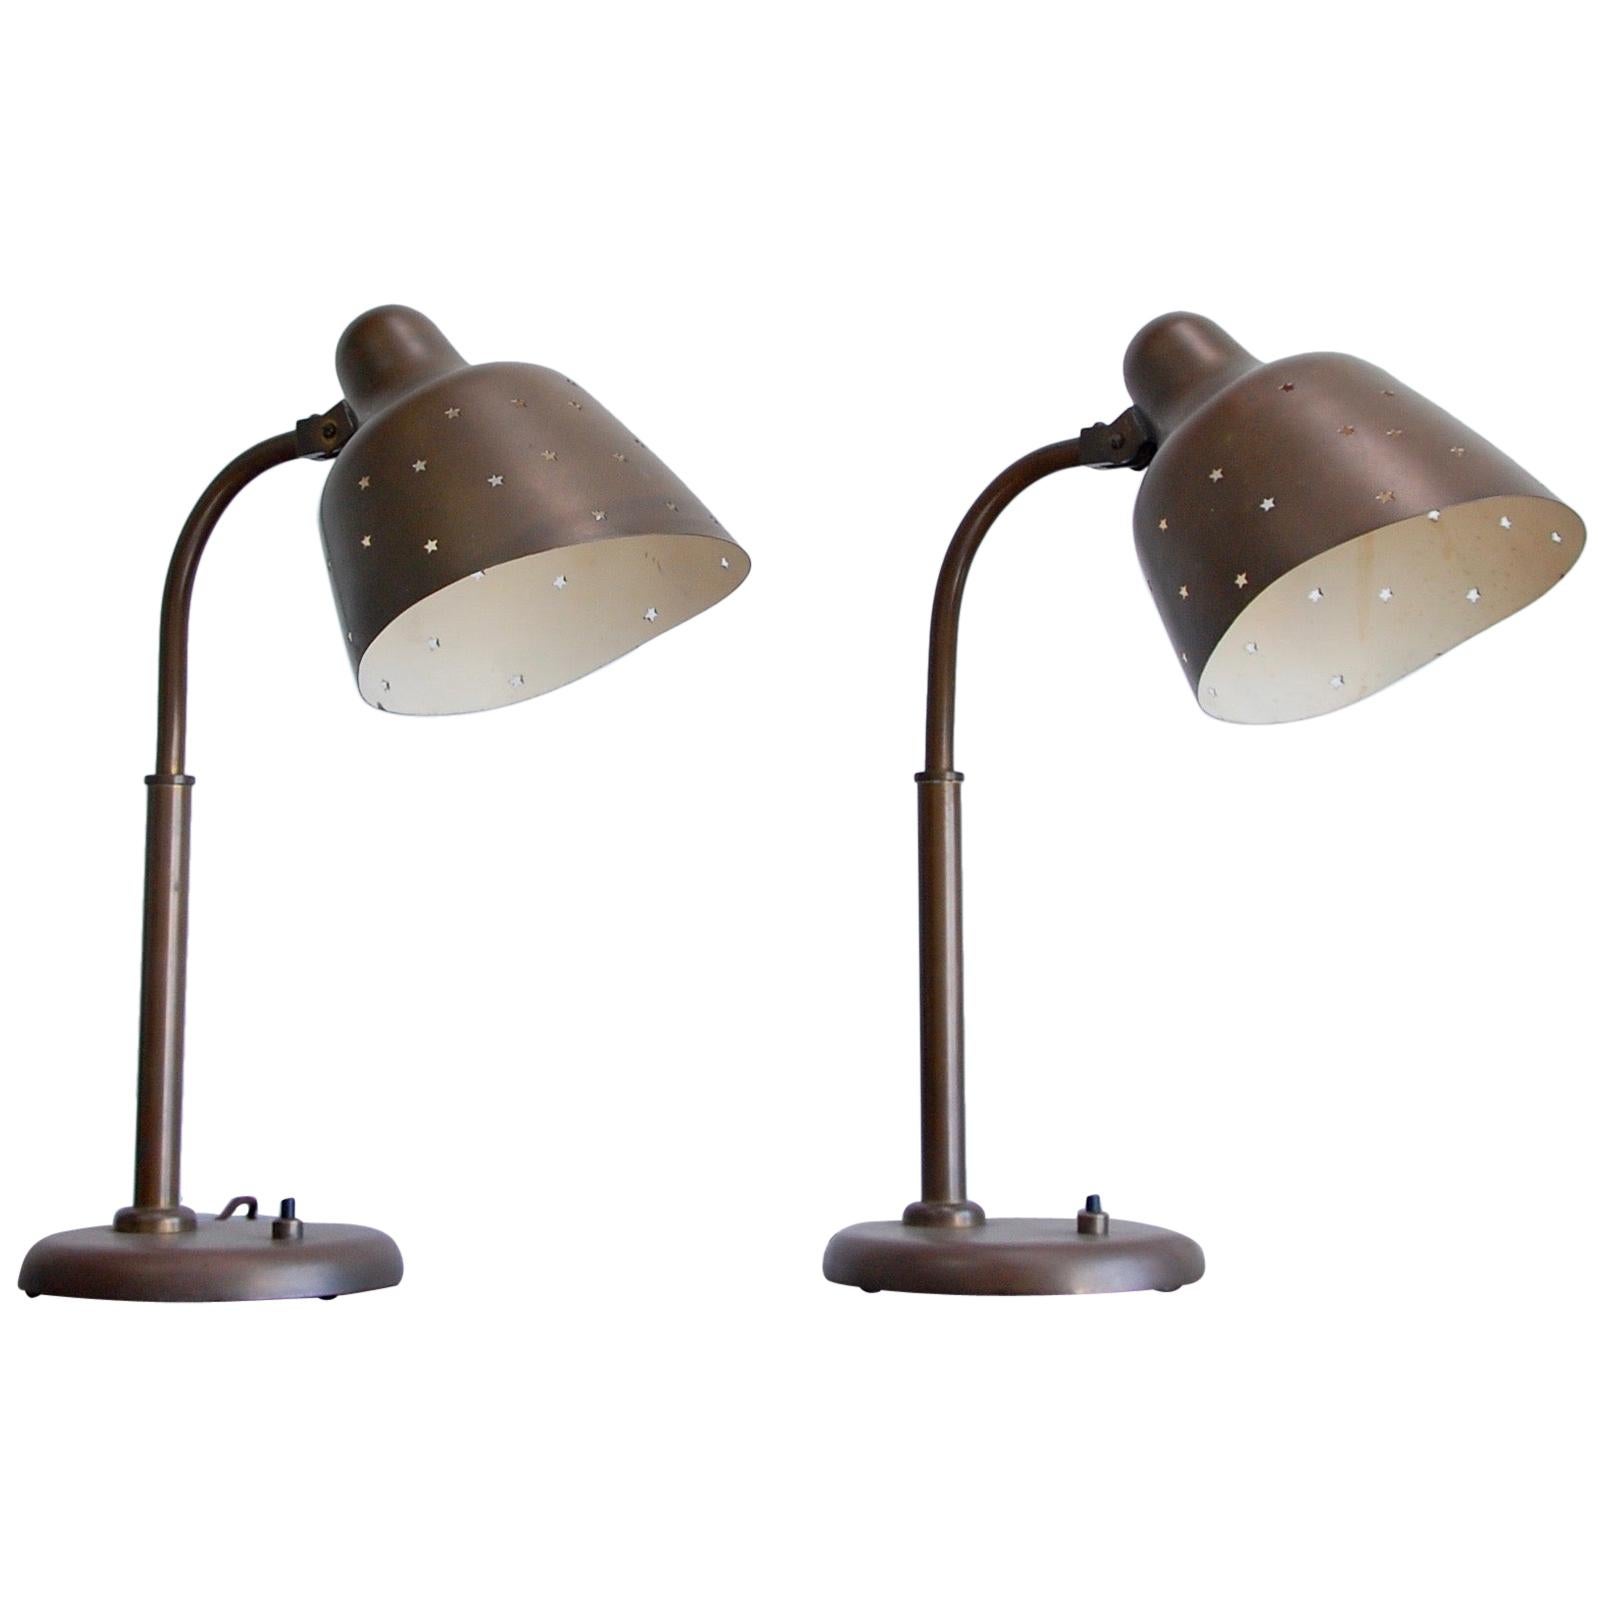 Arredoluce Attributed Star Table Lamps